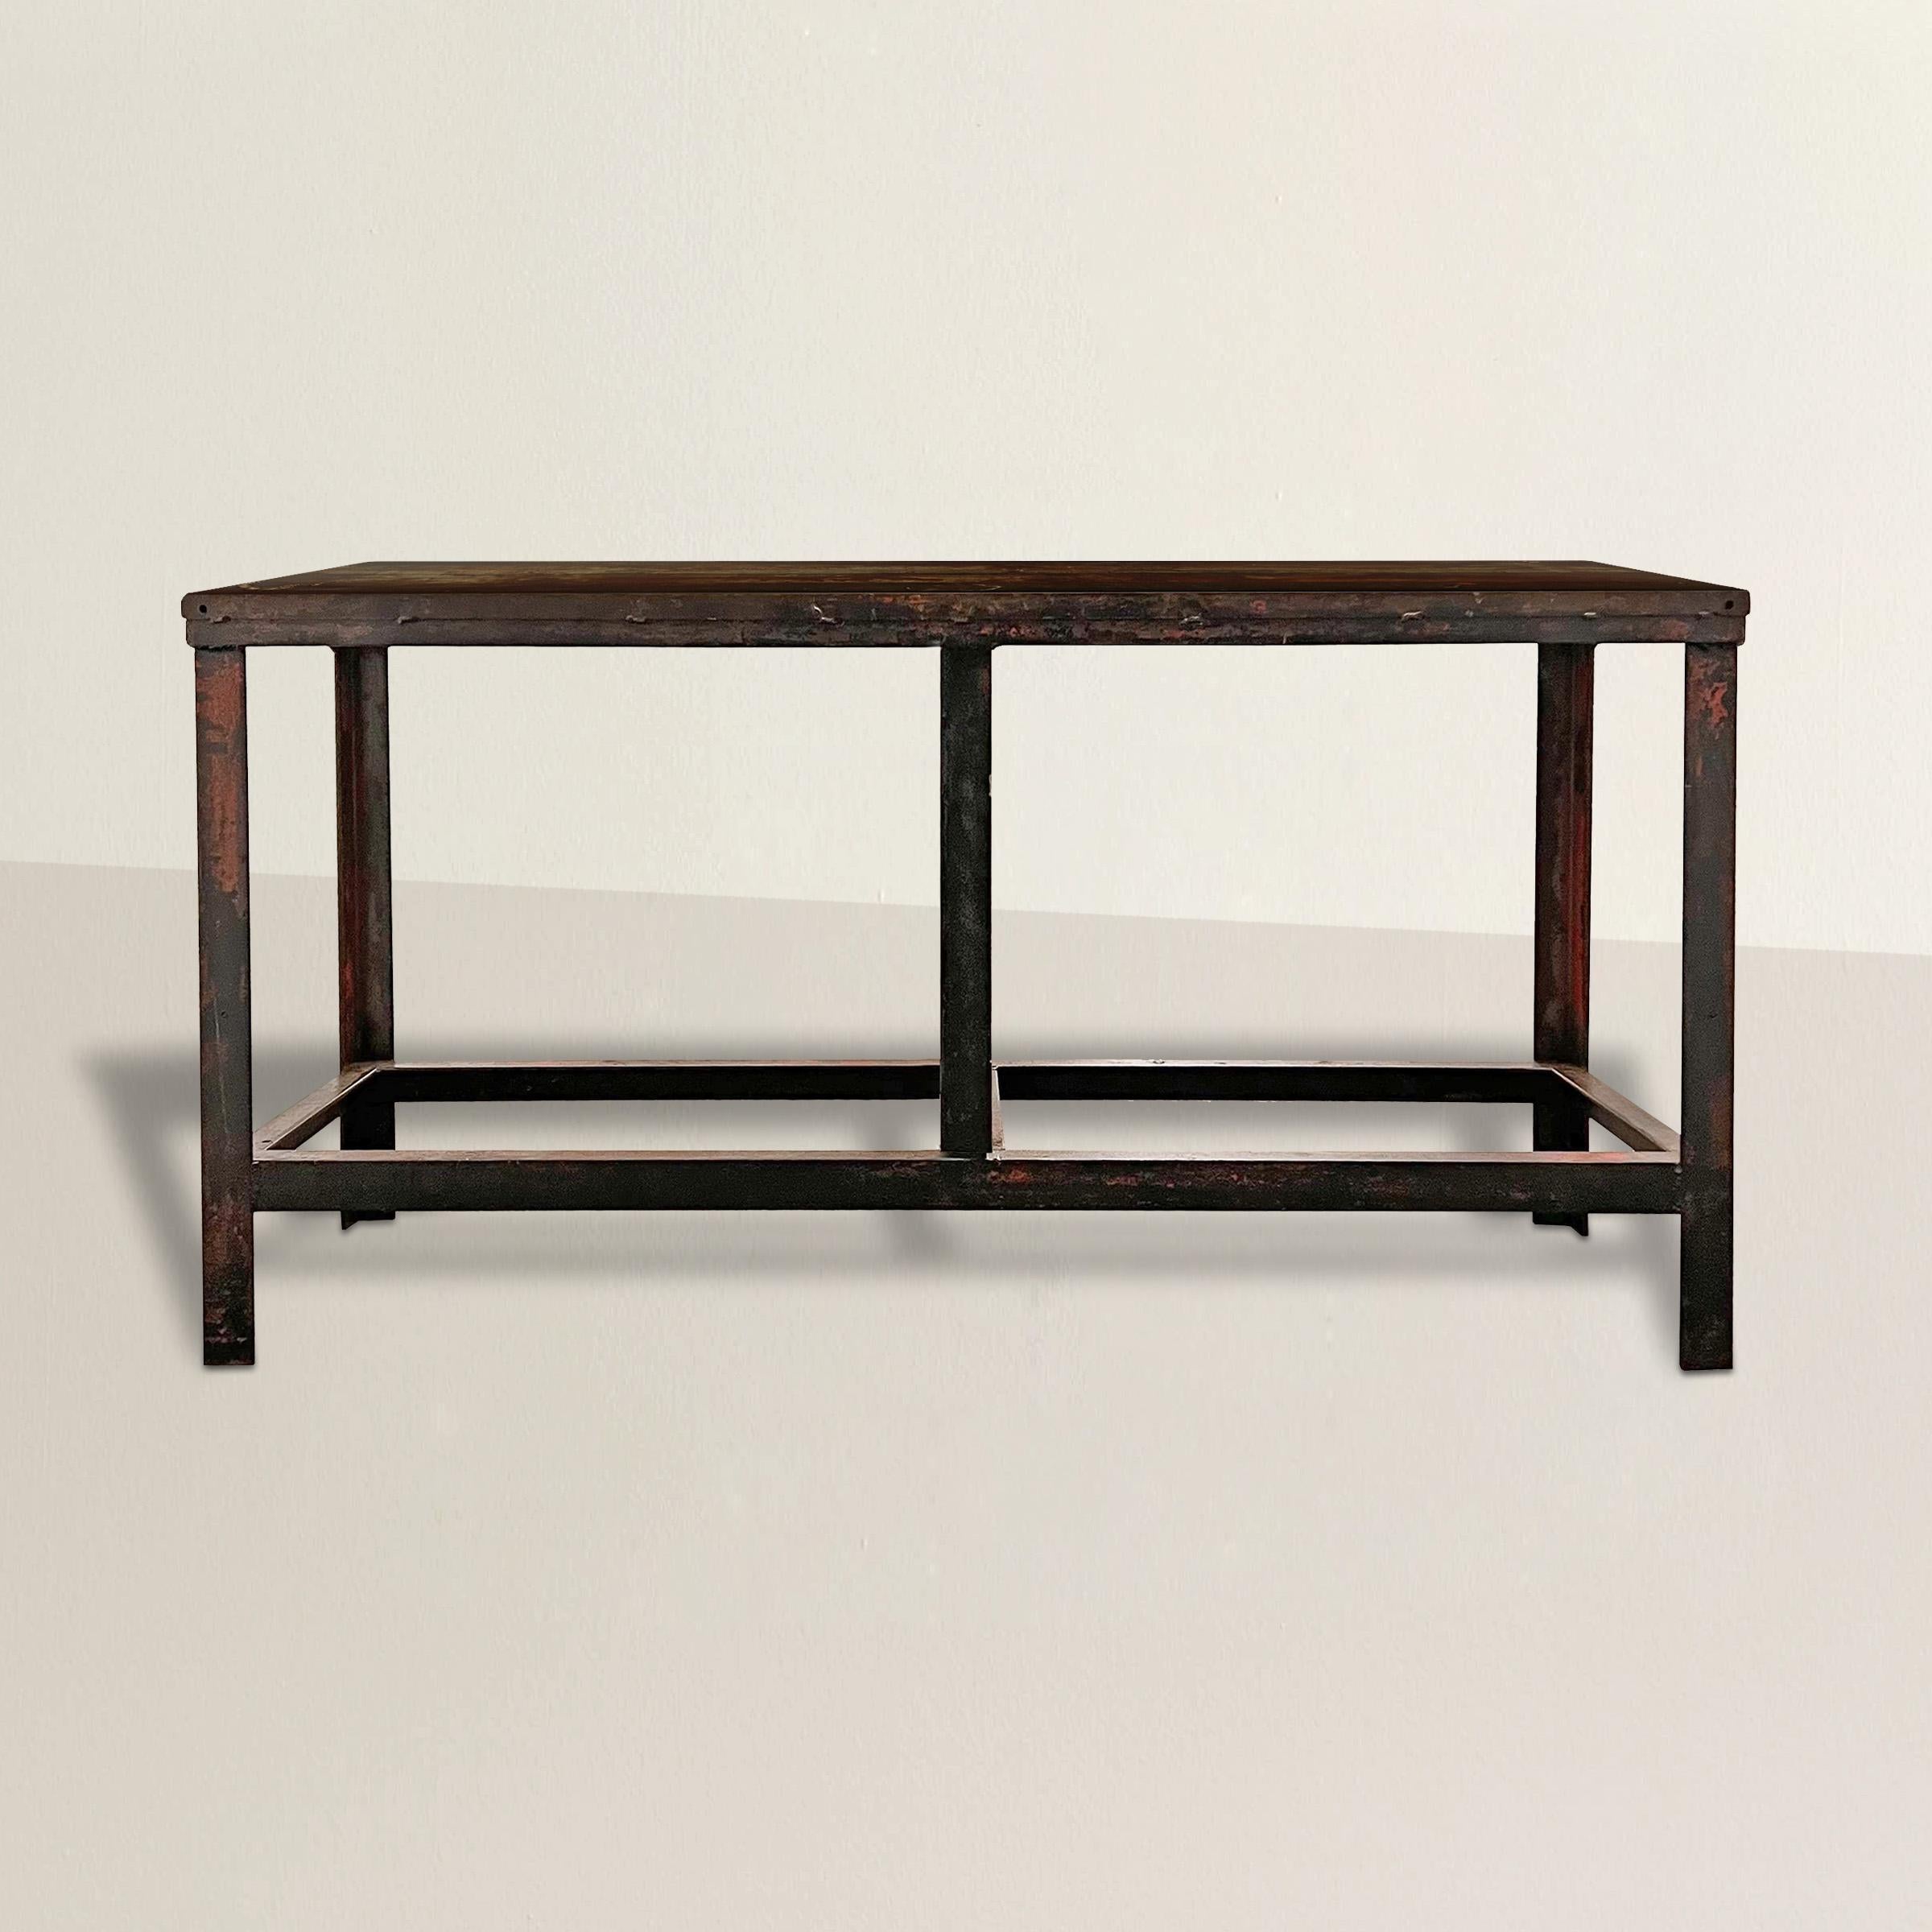 An incredible early 20th century American industrial steel console with the most wonderful patina and traces of red paint. Table is perfect as a console table, sofa table, or sideboard in your dining room.